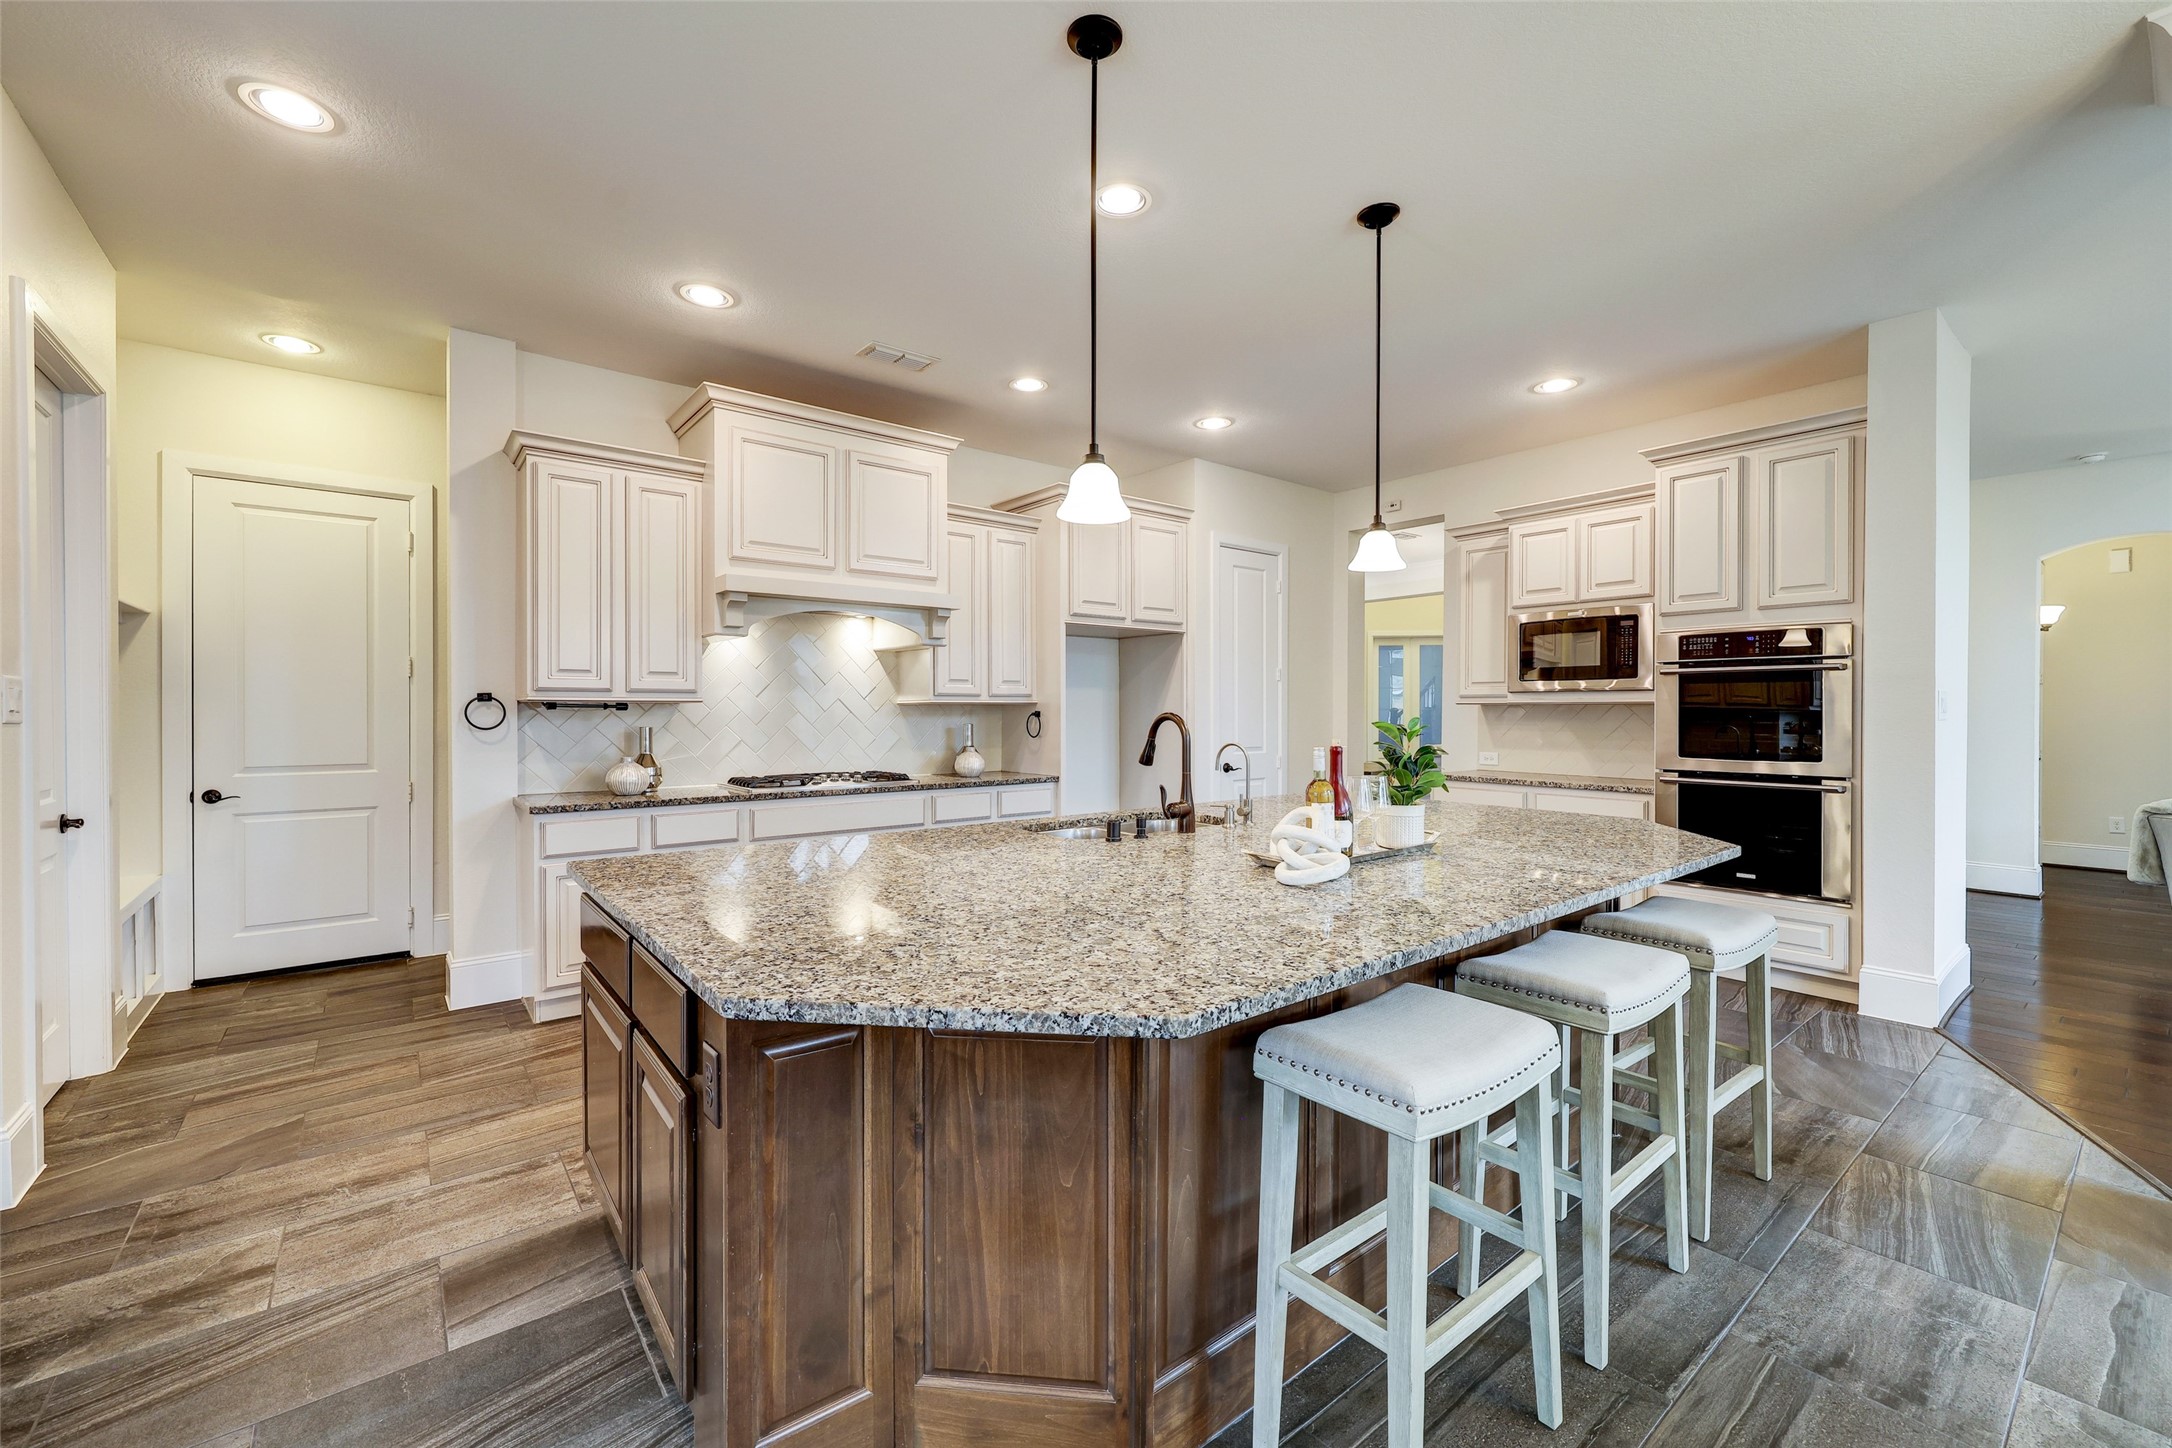 A haven of culinary possibilities with its tasteful palette, oversized island and stainless appliances, the eat-in kitchen is the heart of this home.